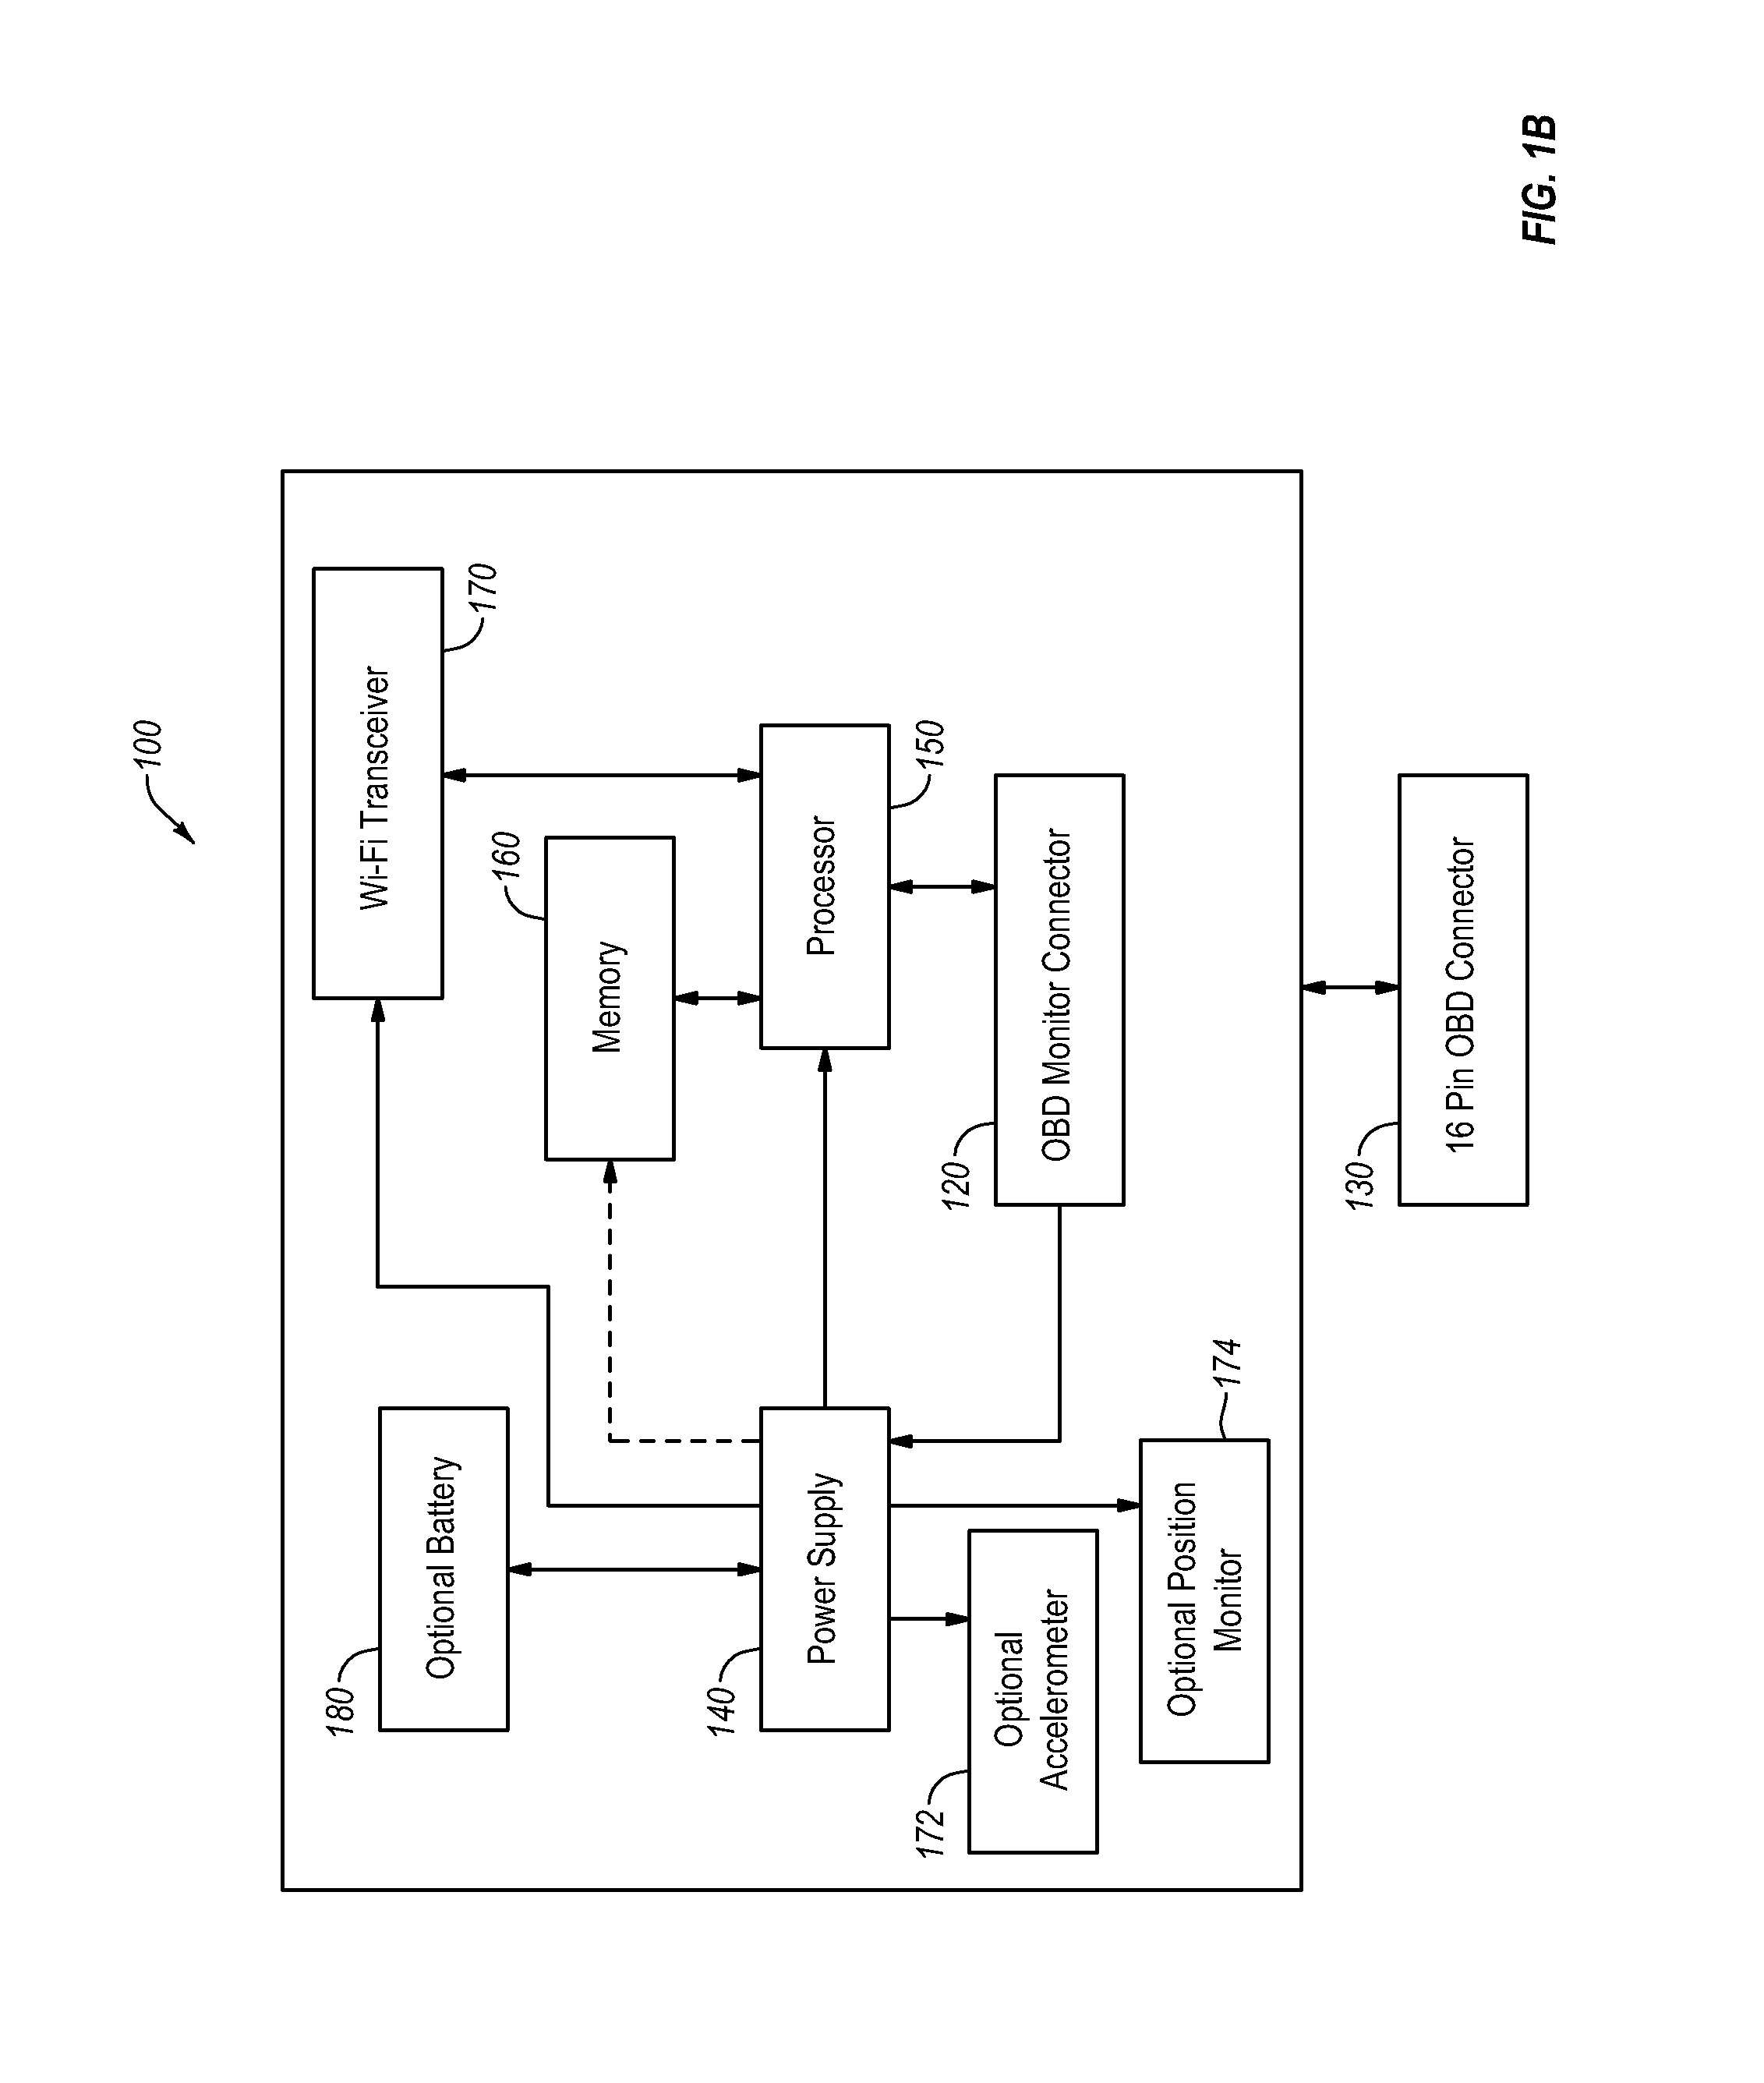 Automotive diagnostics and marketing systems and methods